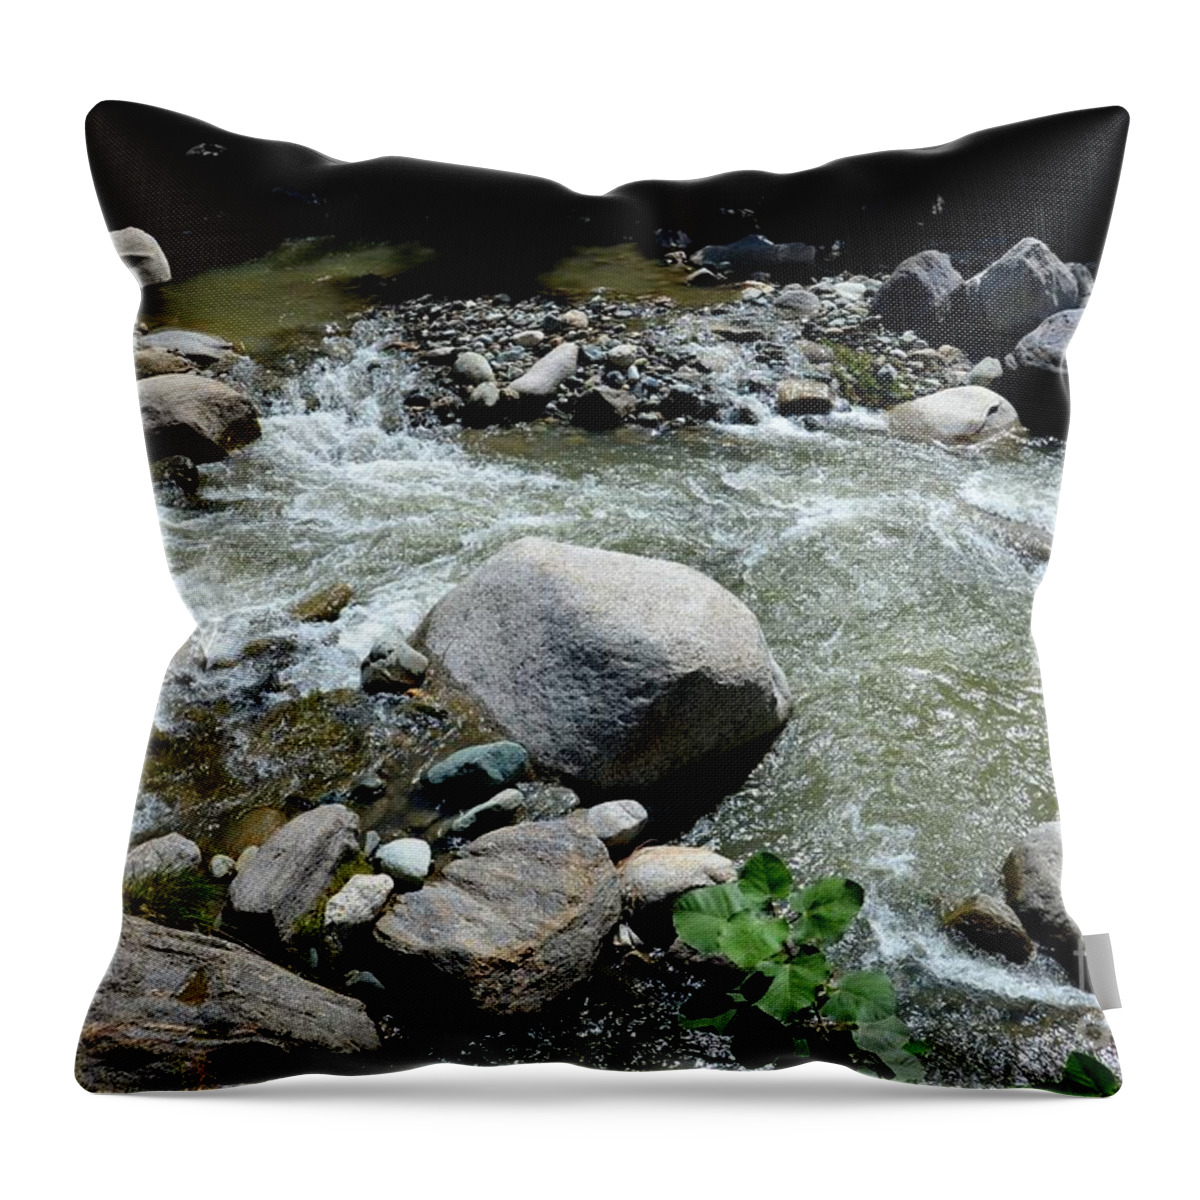 Blue Throw Pillow featuring the photograph Stream water foams and rushes past boulders by Imran Ahmed